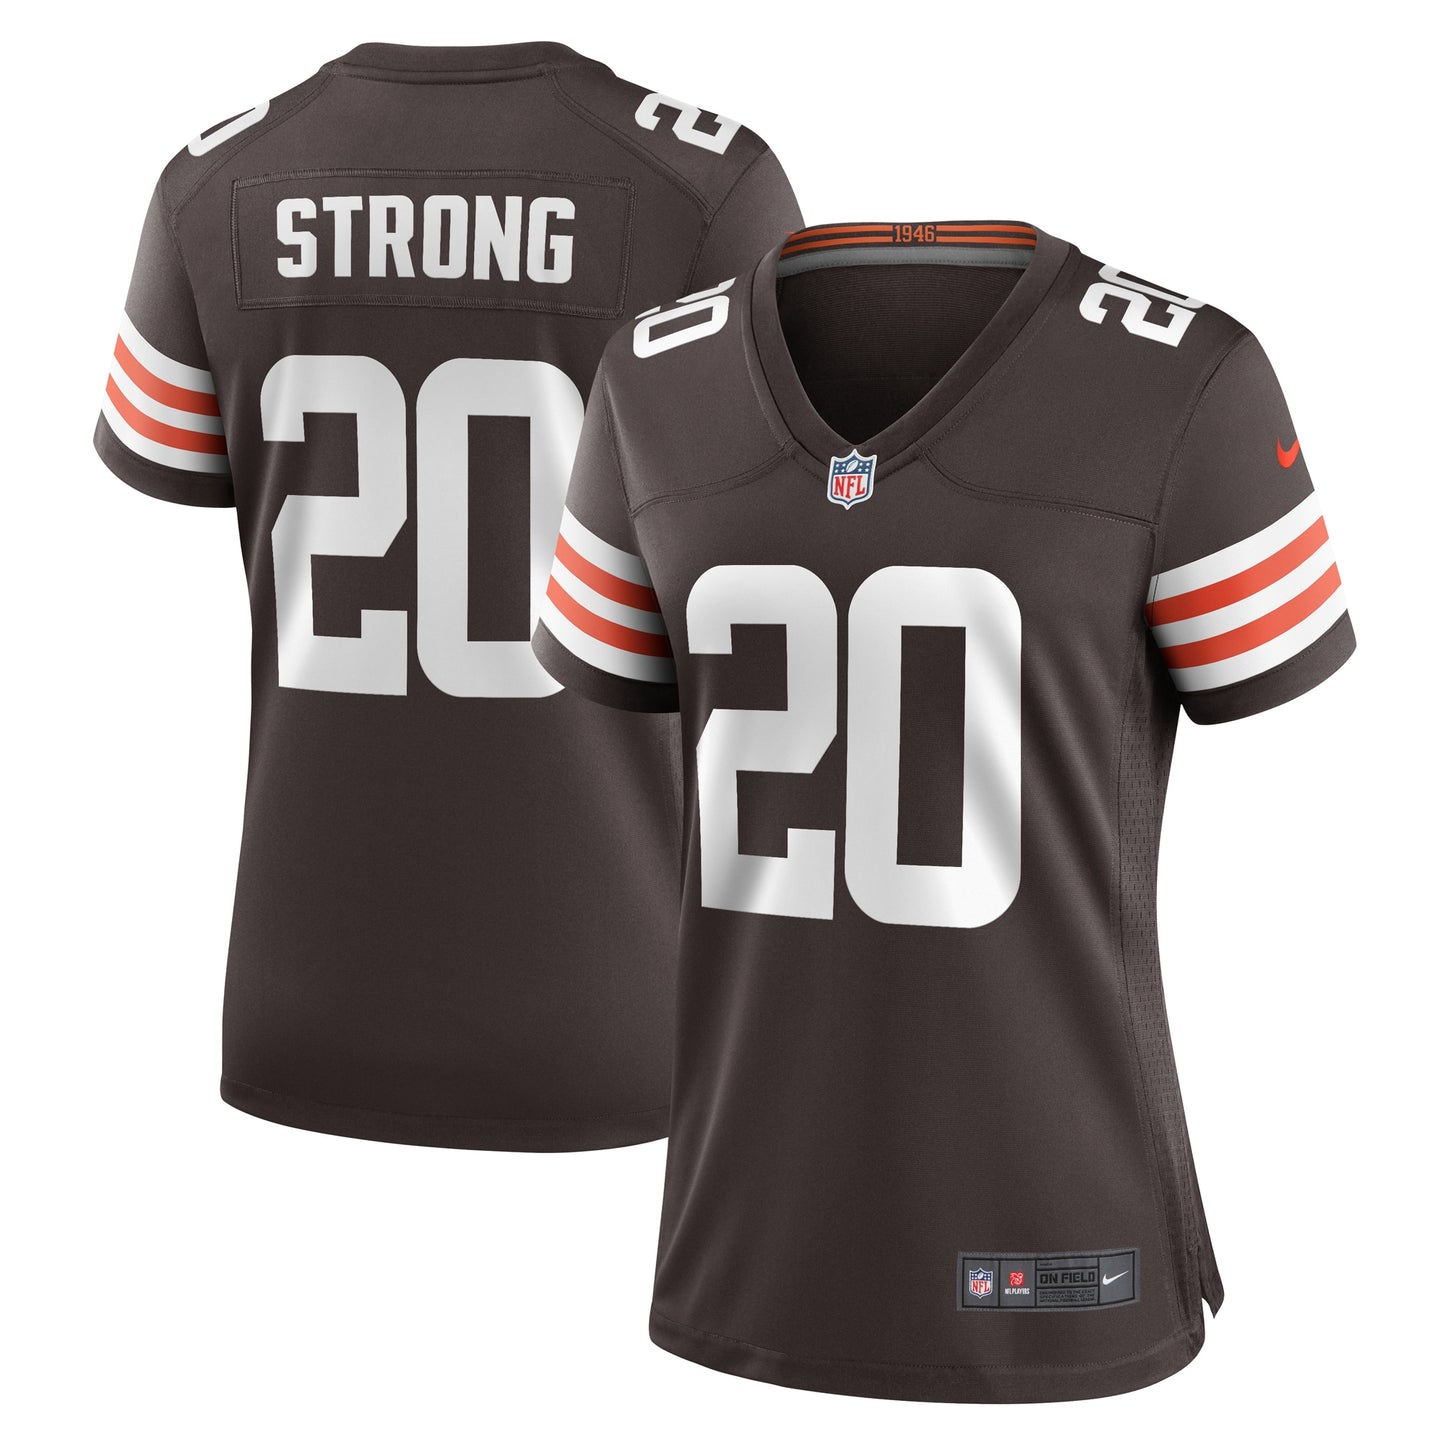 Pierre Strong Jr. Cleveland Browns Nike Women's Team Game Jersey - Brown